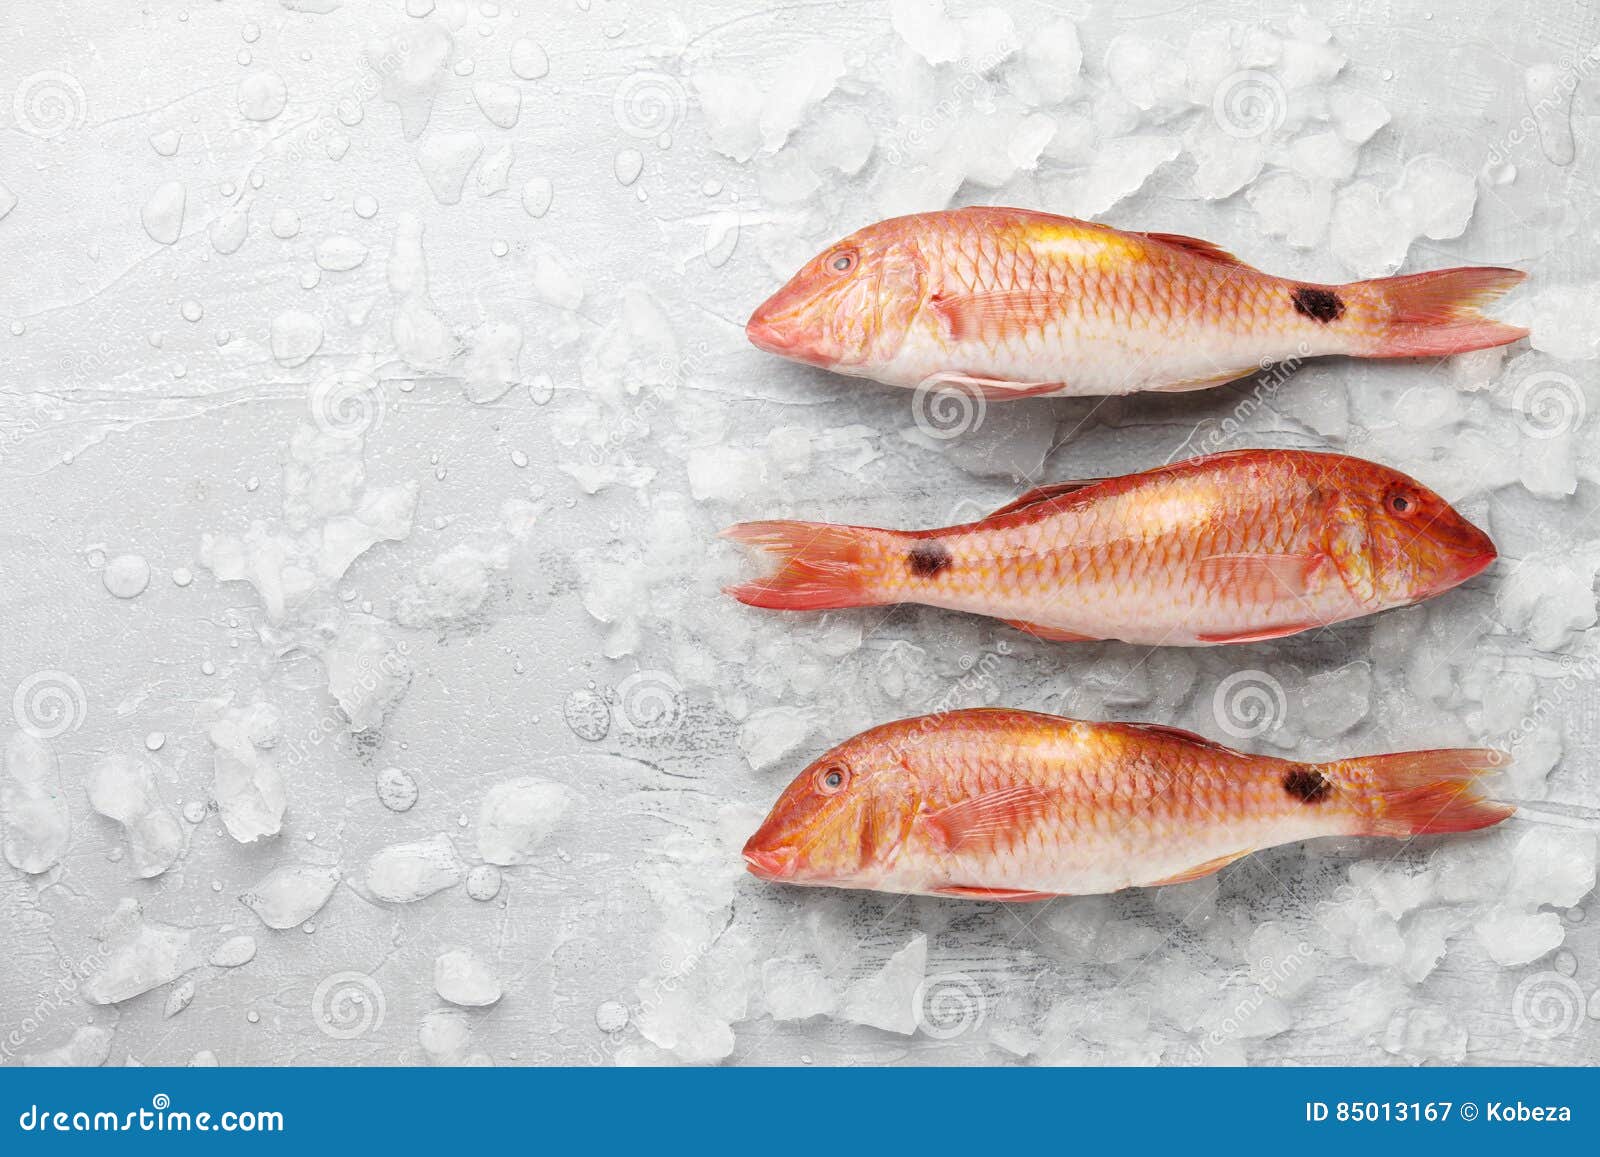 Red Mullet Fish On Icy Background Stock Image Image of